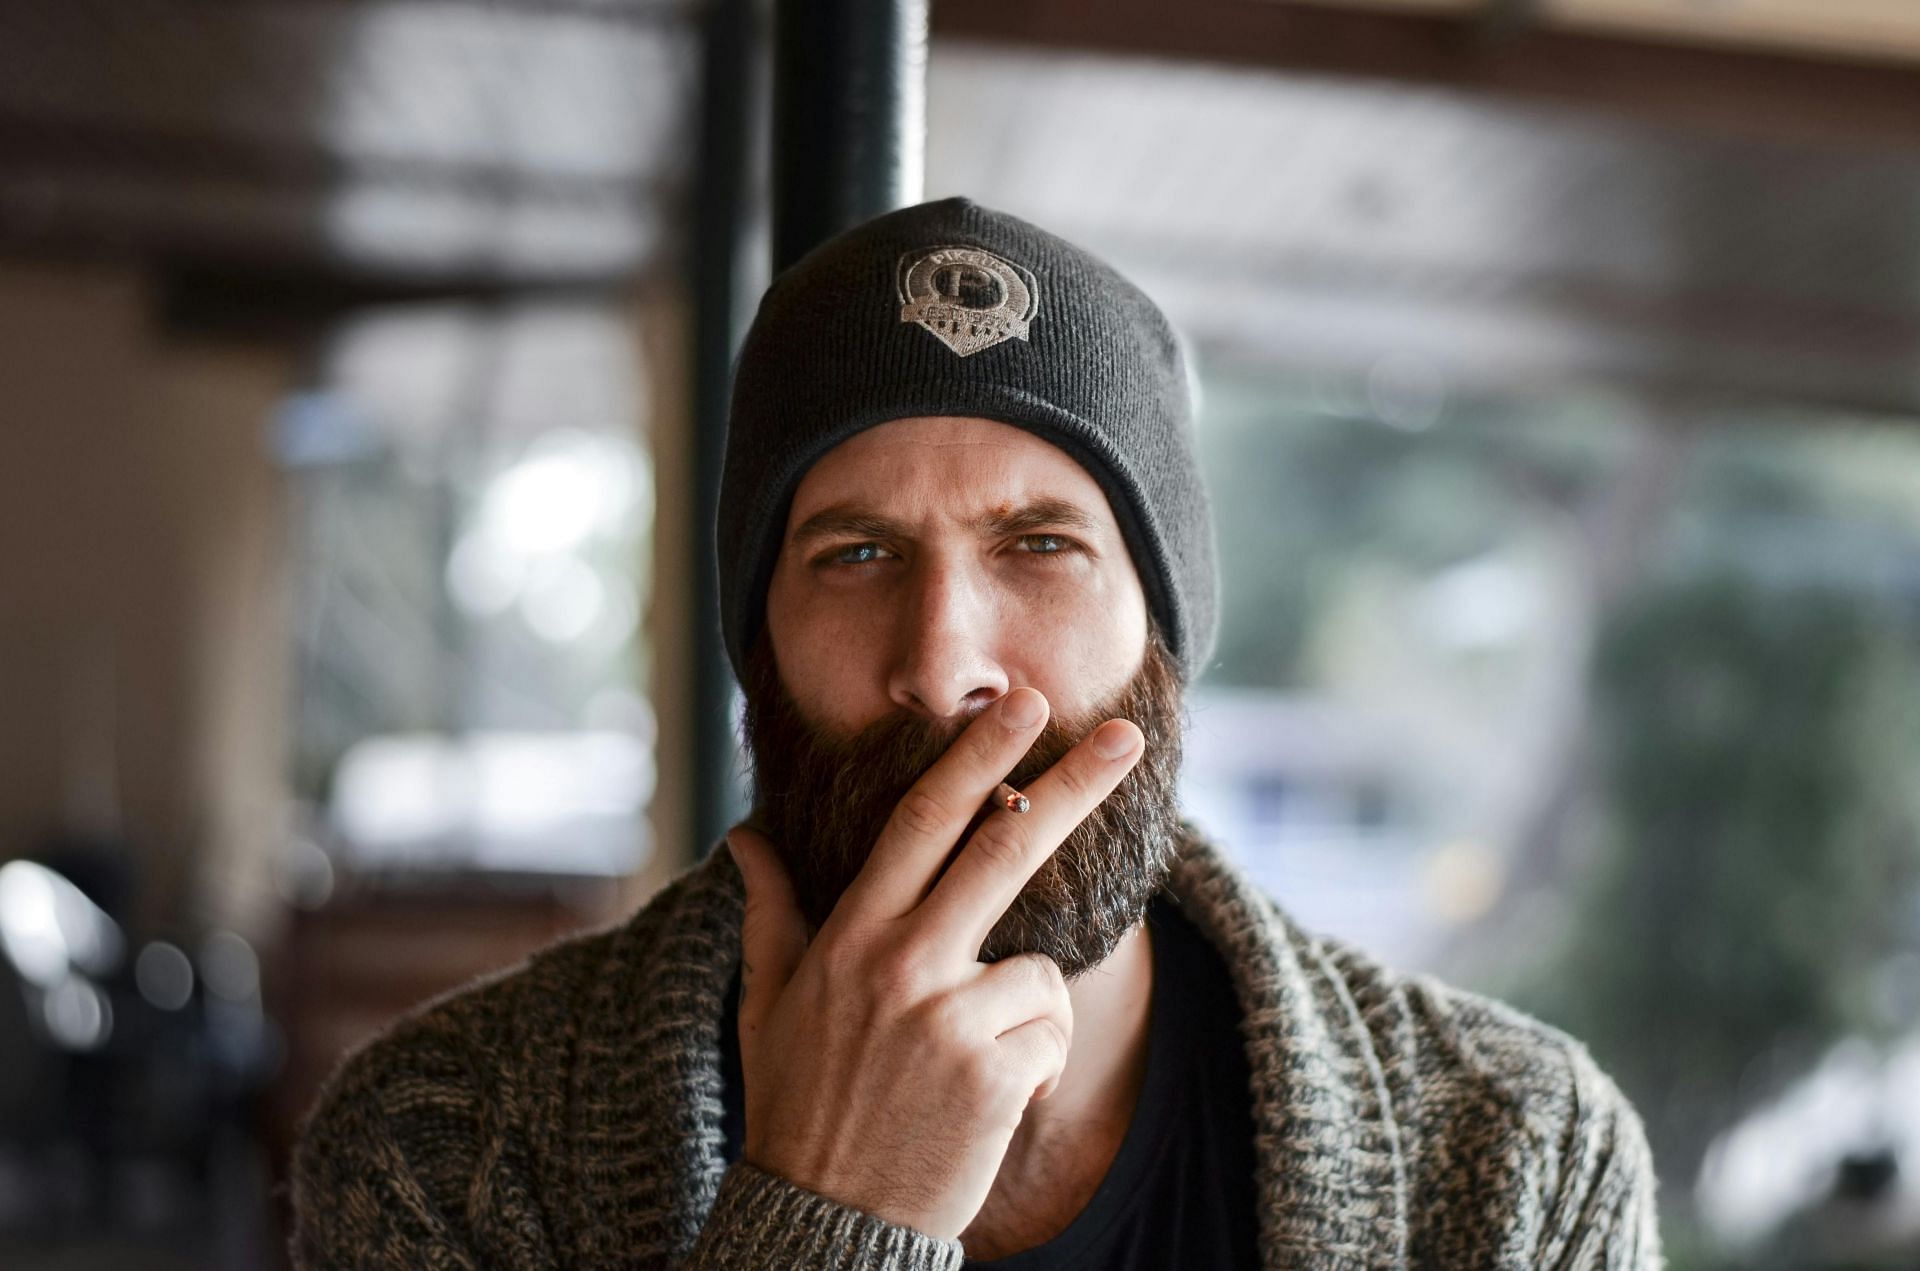 Tips to grow beard faster (image sourced via Pexels / Photo by julia)